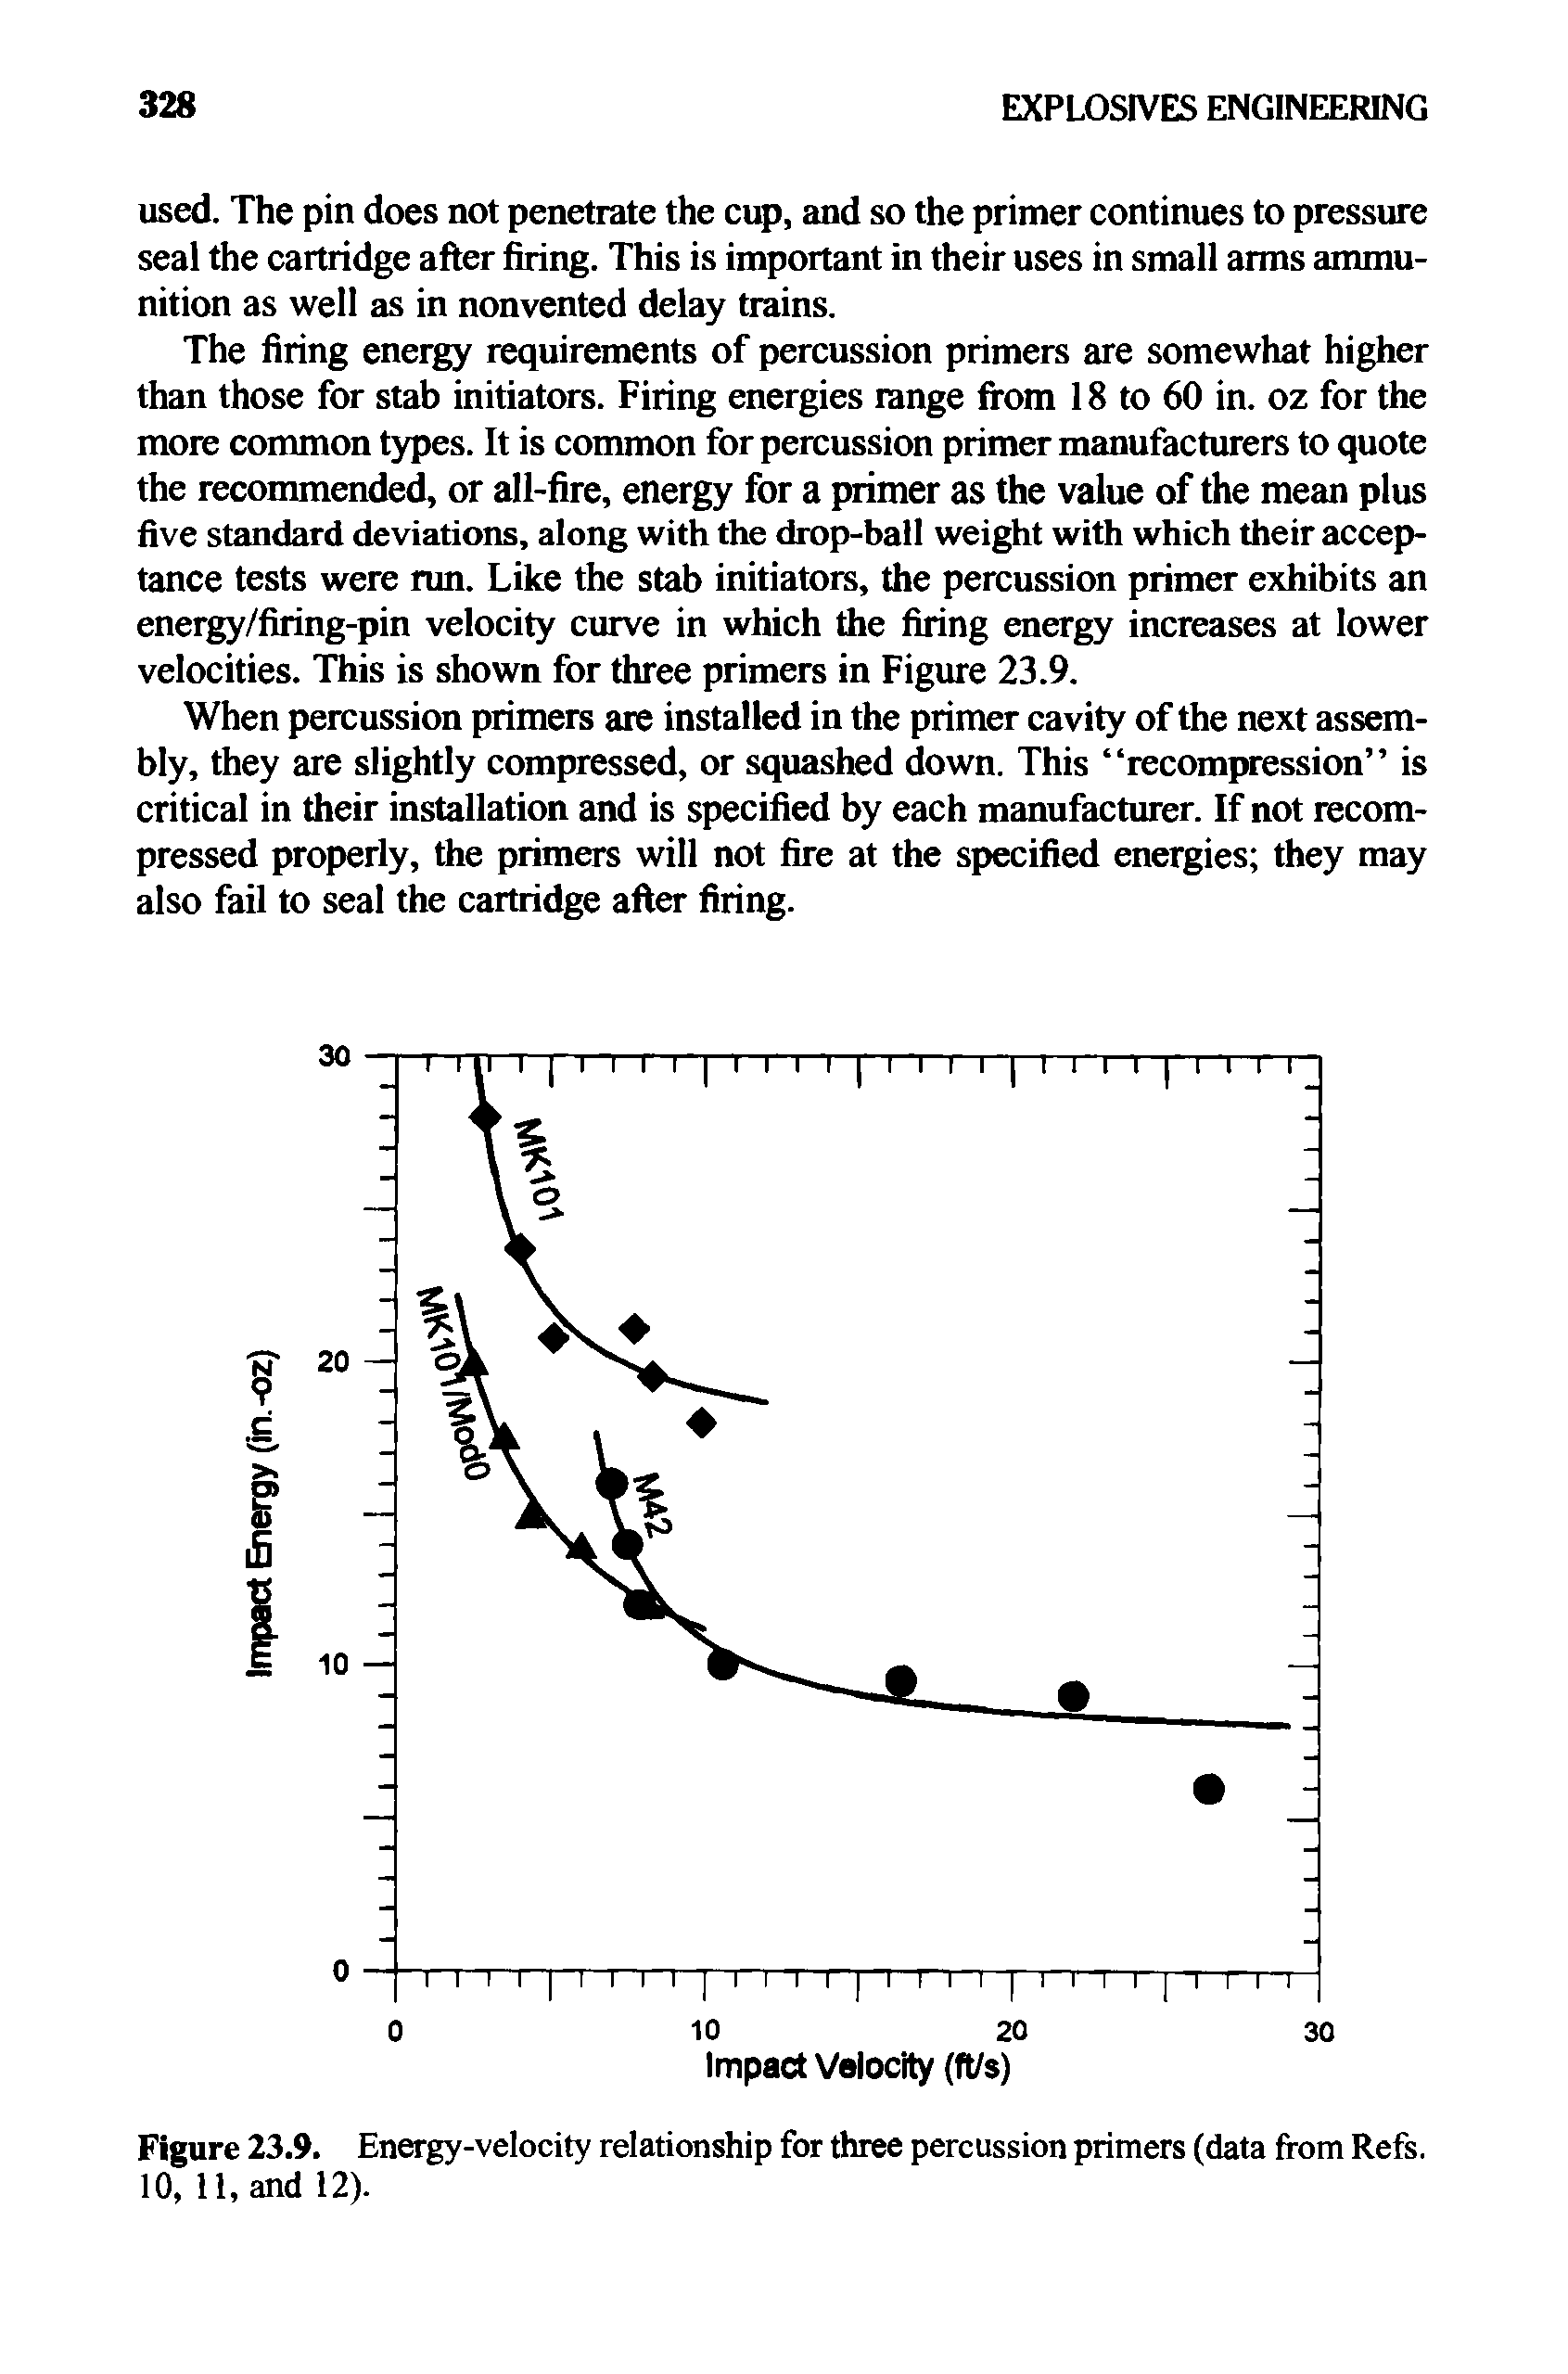 Figure 23.9. Energy-velocity relationship for three percussion primers (data from Refs. 10, 11, and 12).